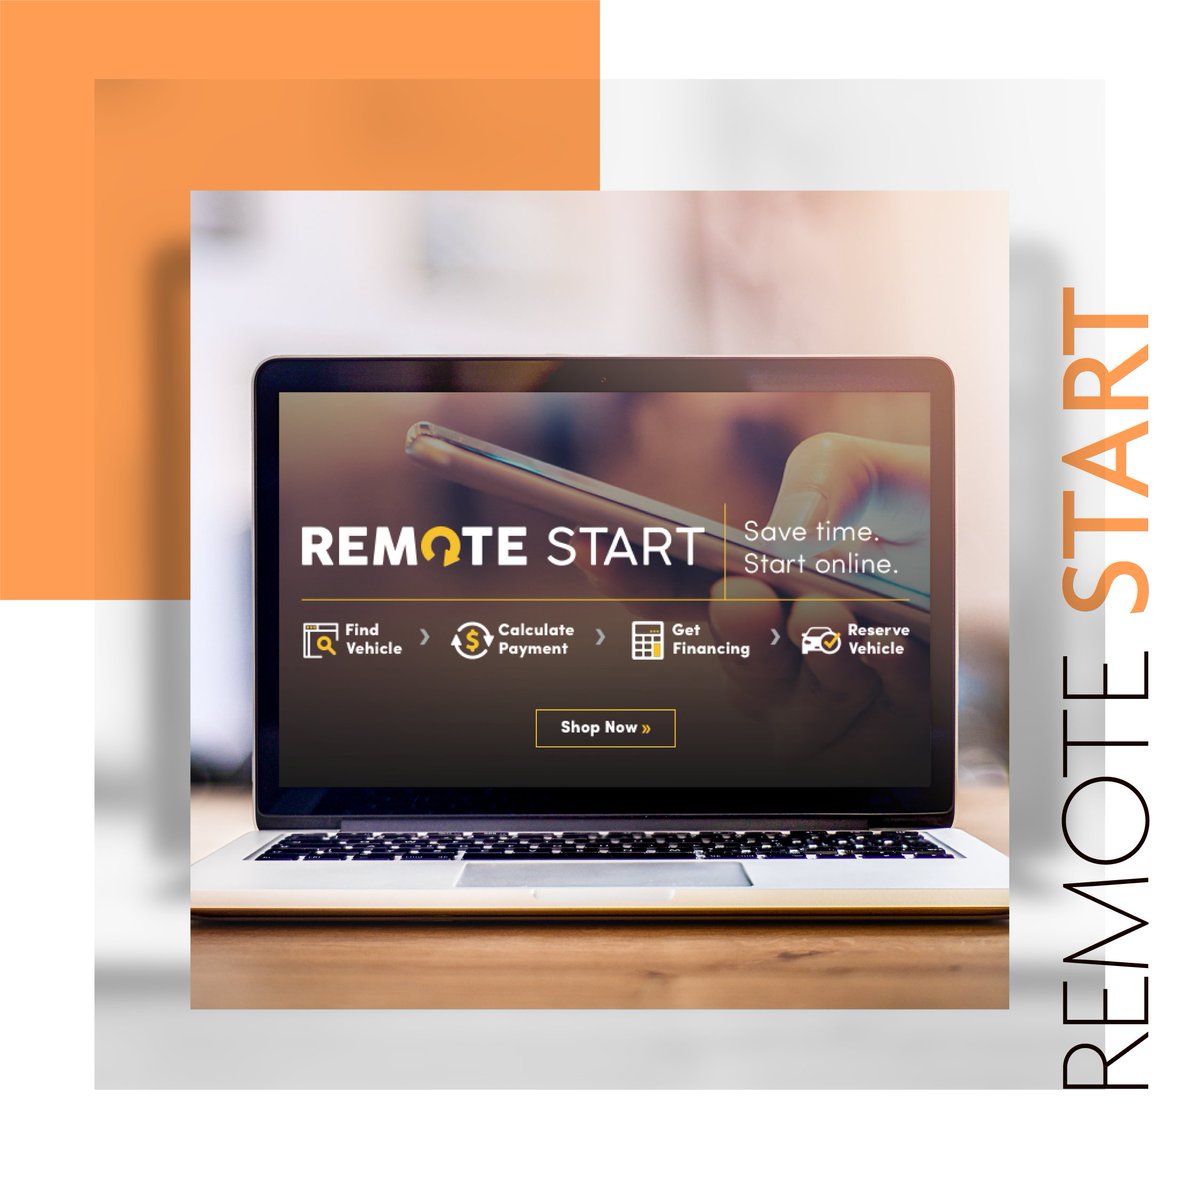 Shop for your next vehicle online with Remote Start! With just a few easy steps, you can select your vehicle, calculate your payment, and value your trade-in. Then we'll contact you to finalize and sign your deal! #RemoteStart
Get started now: ow.ly/eh6C50Mk1Jn